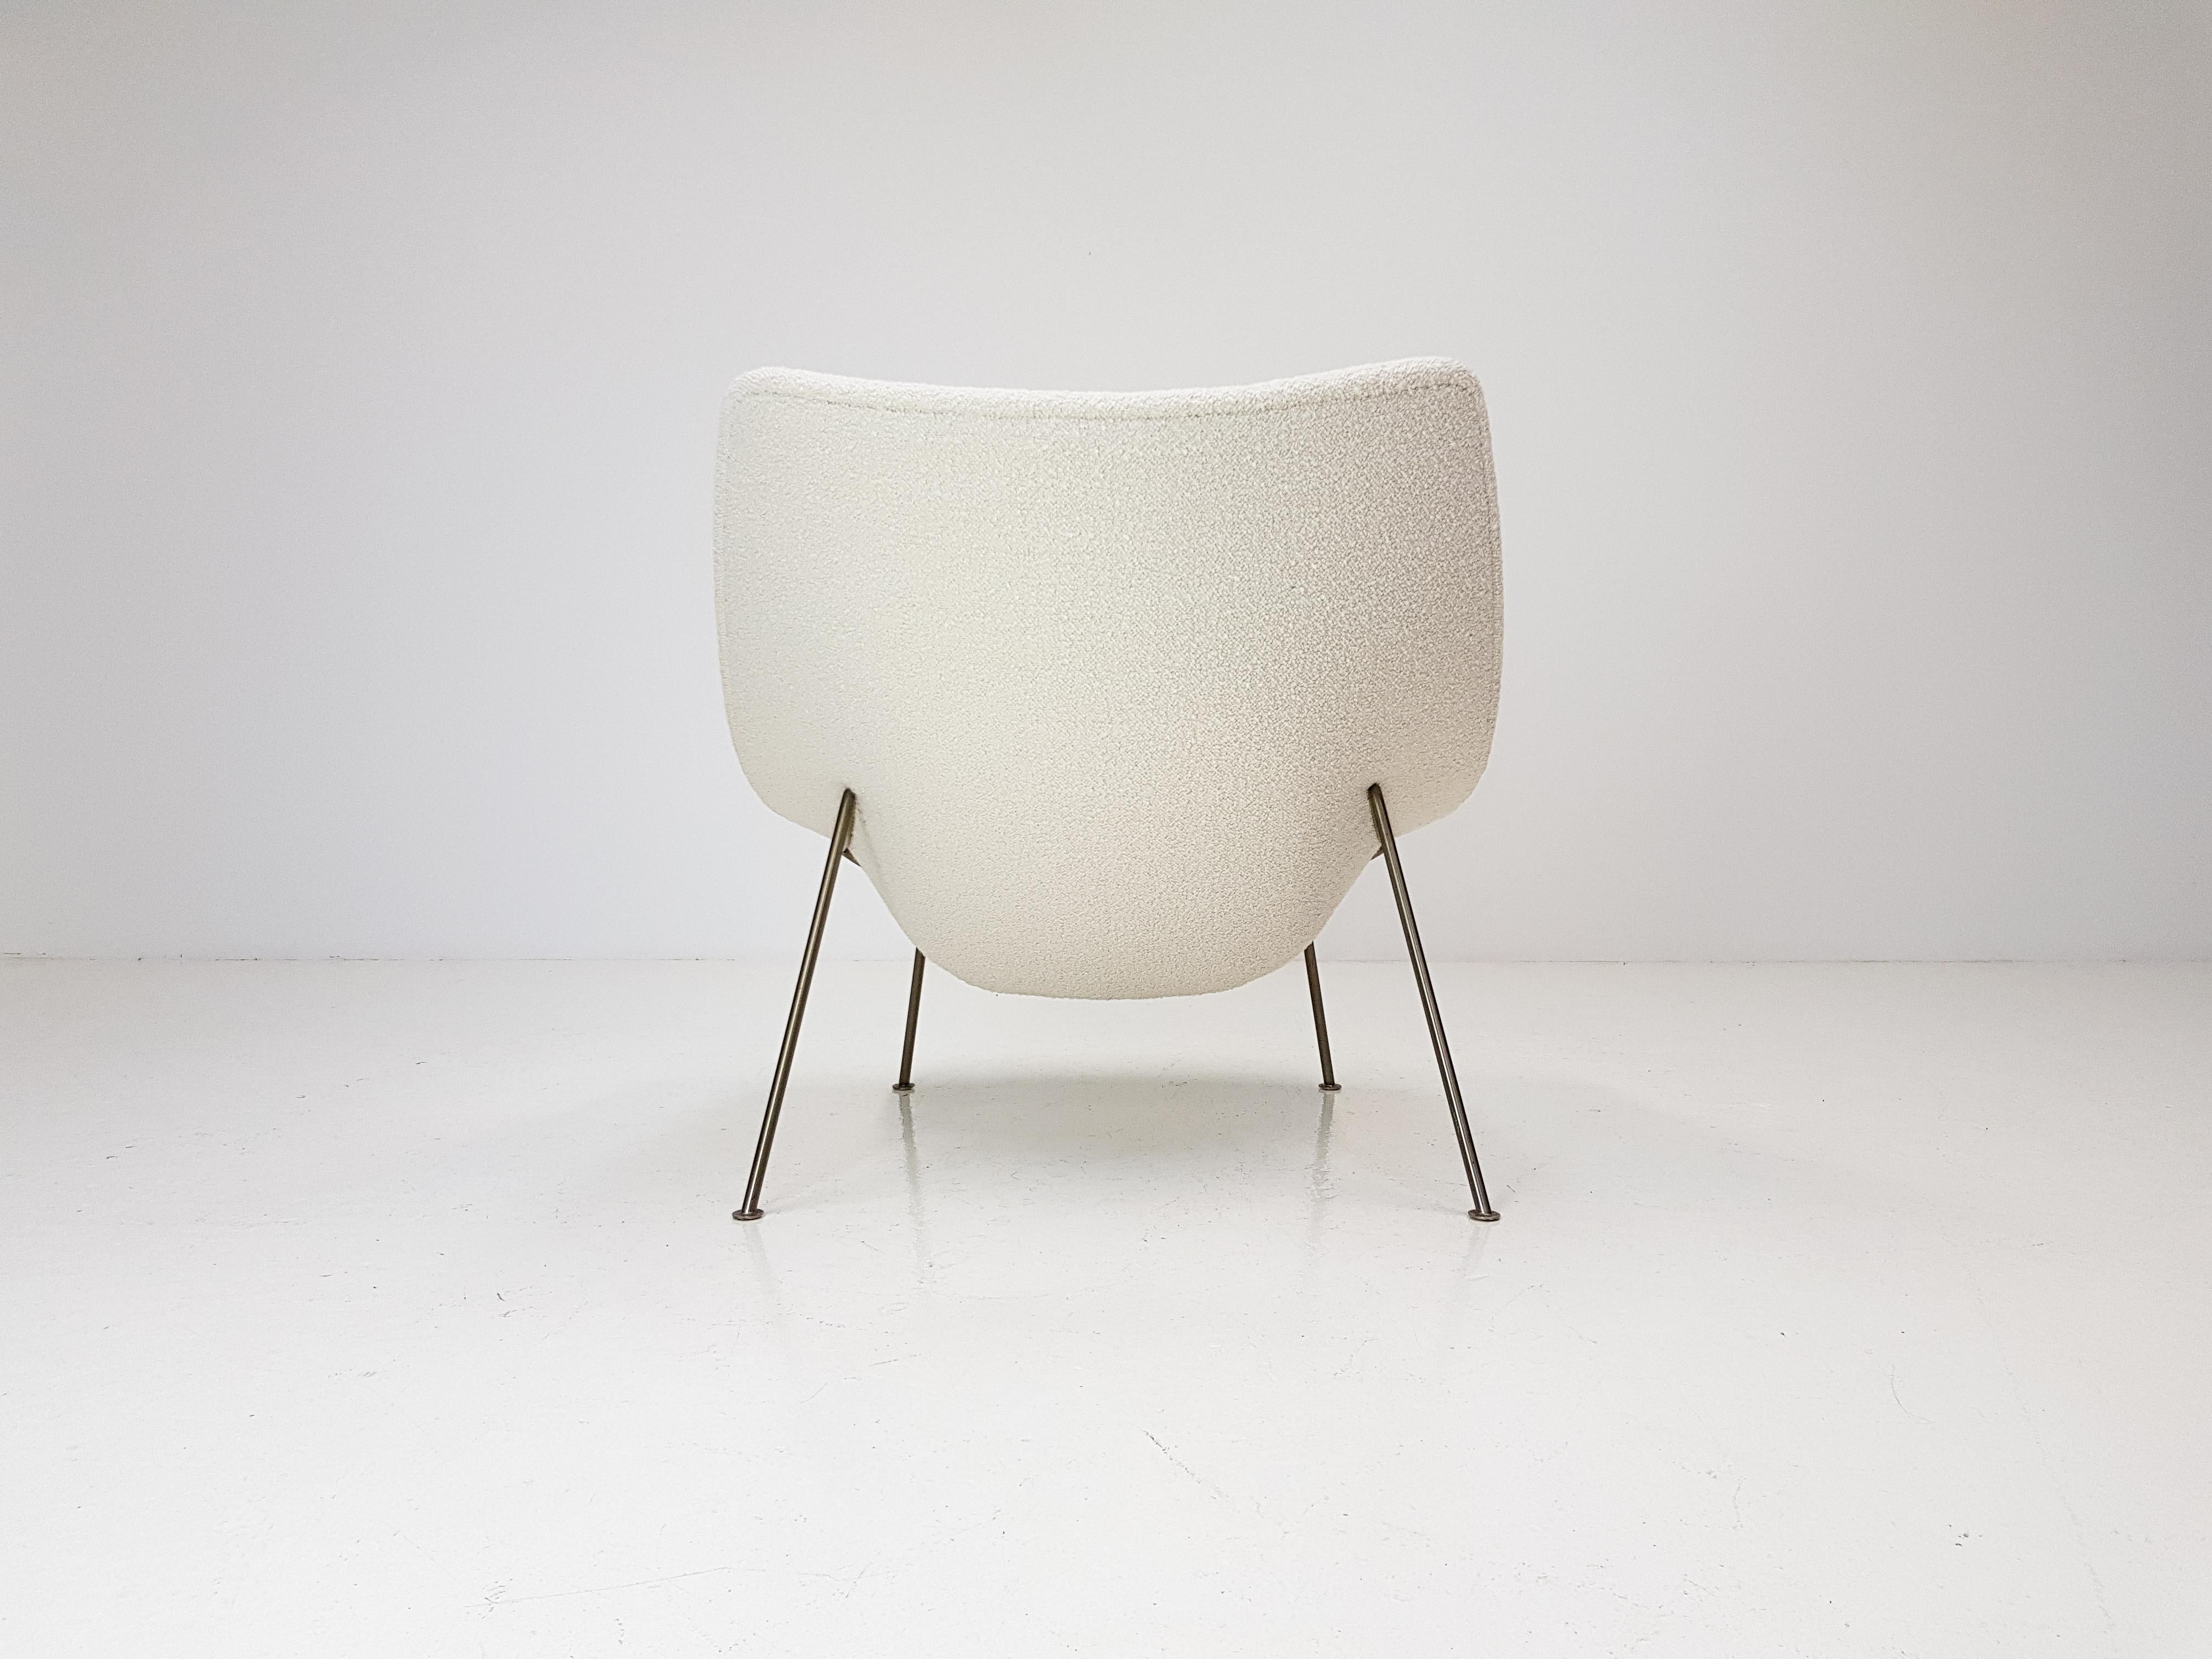 1960s Pierre Paulin Oyster Chair for Artifort in Bouclé Fabric In Good Condition In London Road, Baldock, Hertfordshire